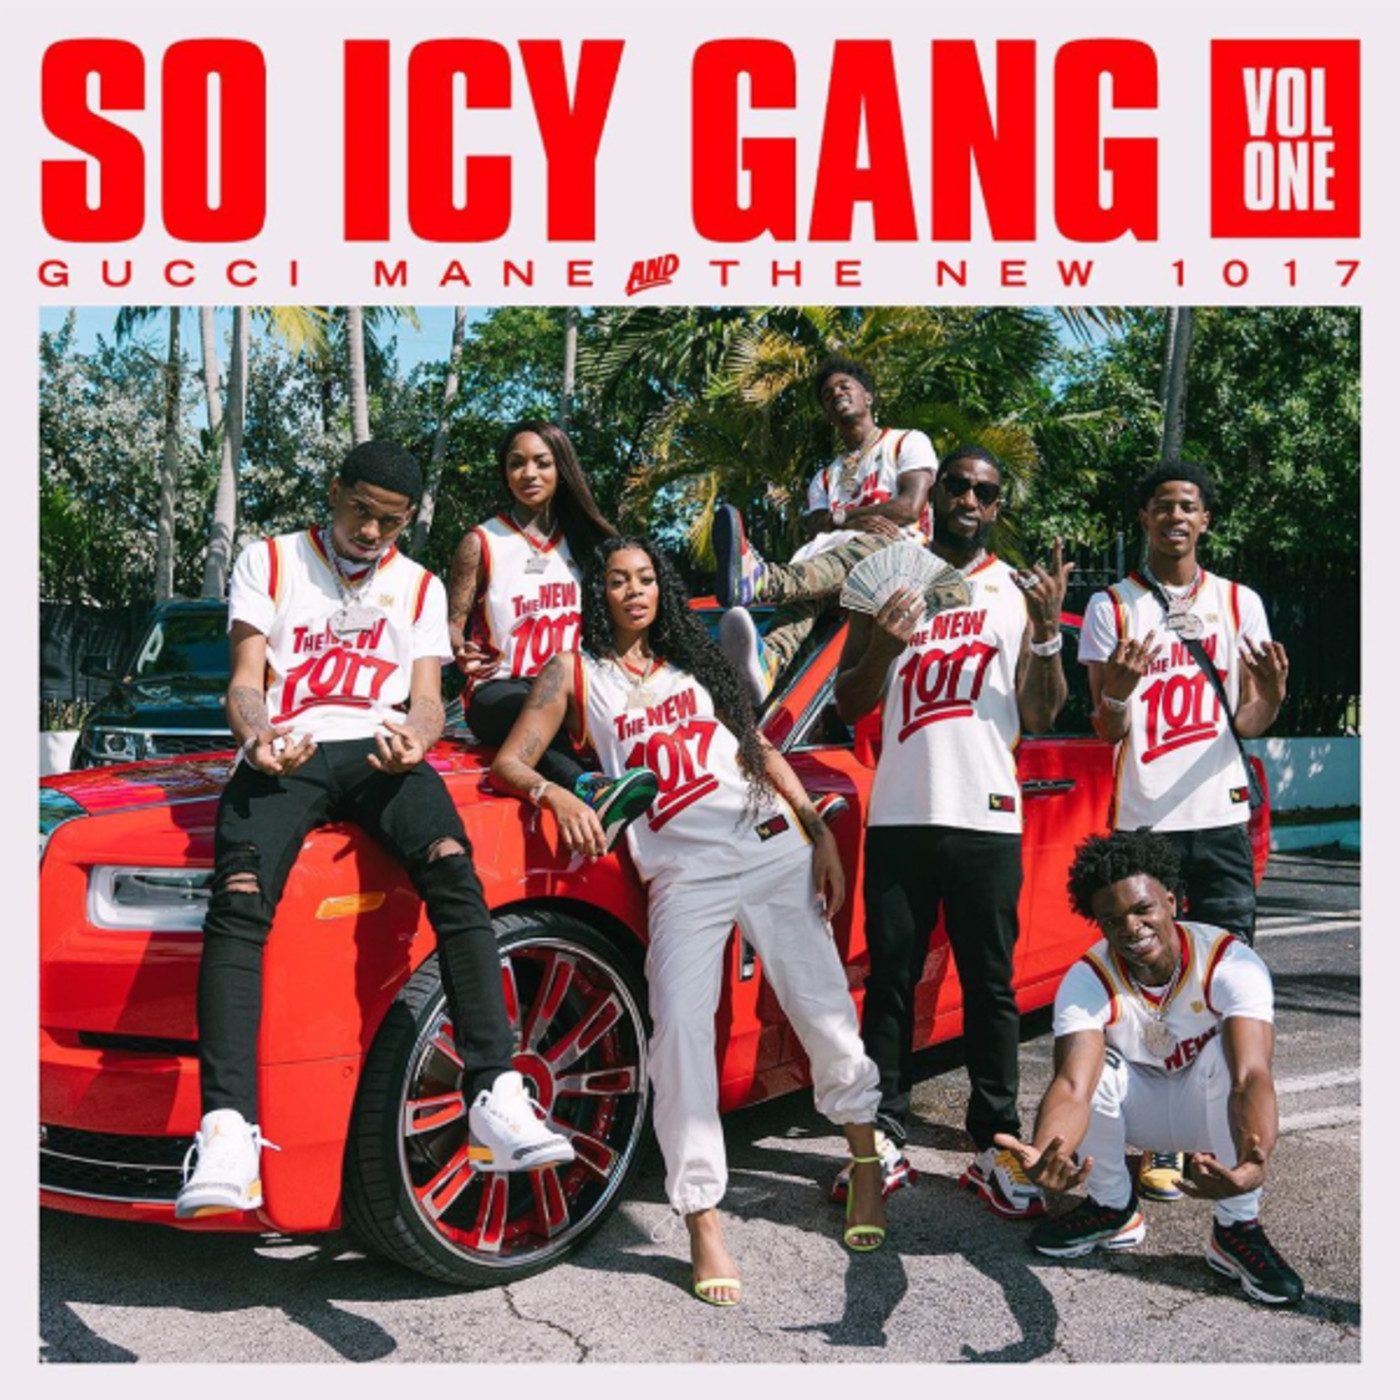 New 1017 Label With 'So Icy Gang Vol. 1 